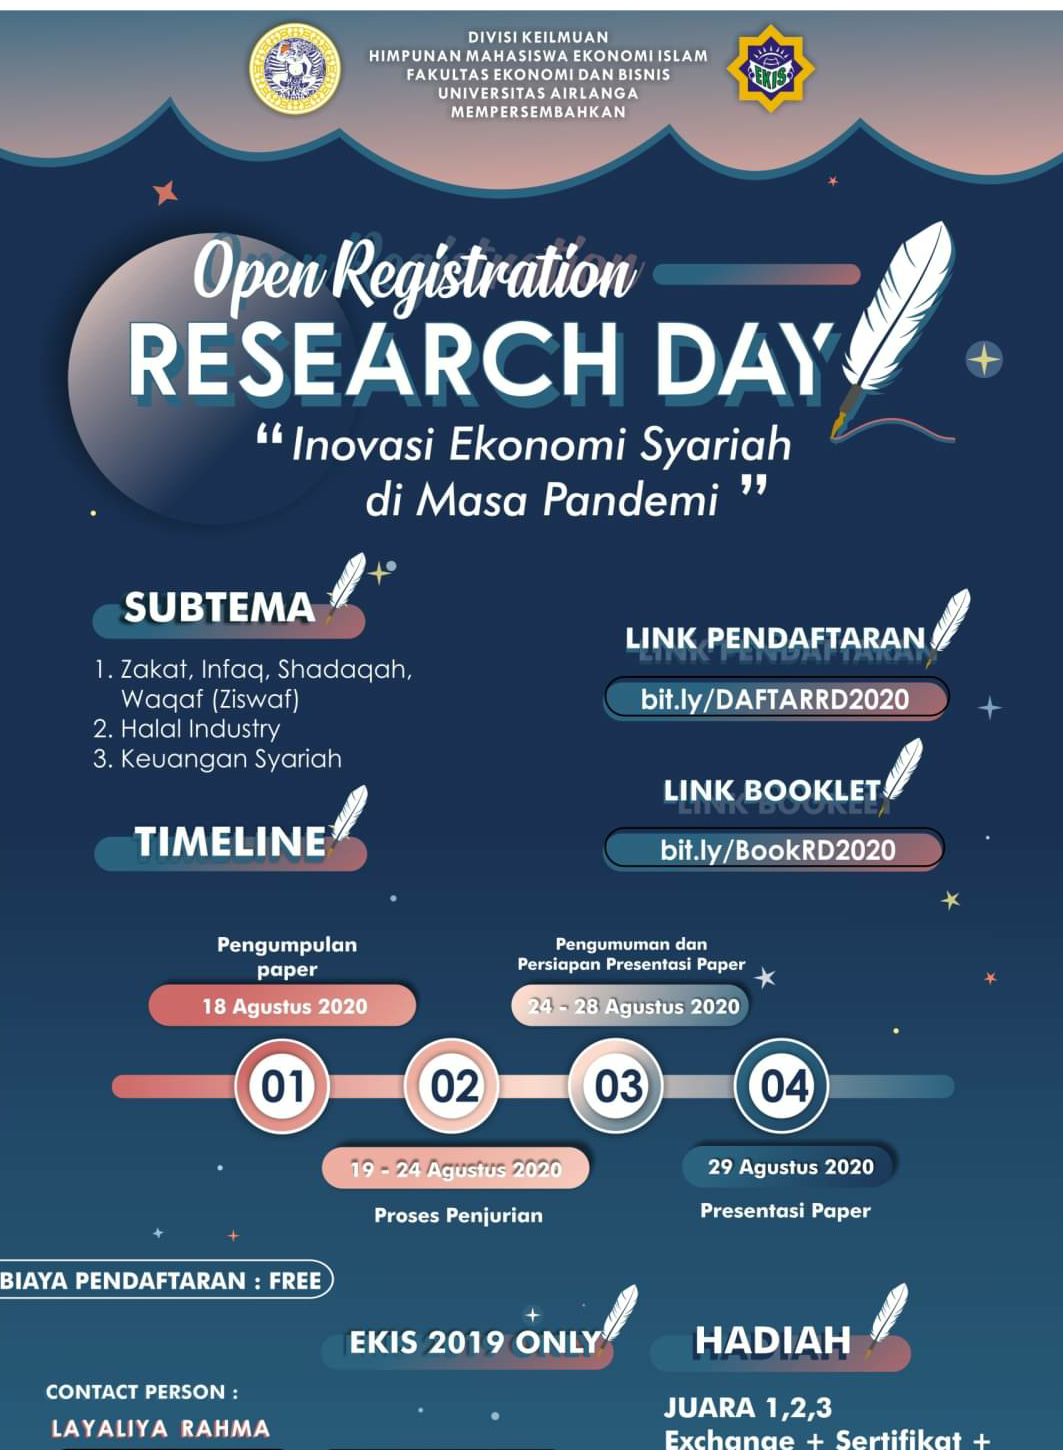 RESEARCH DAY 2020